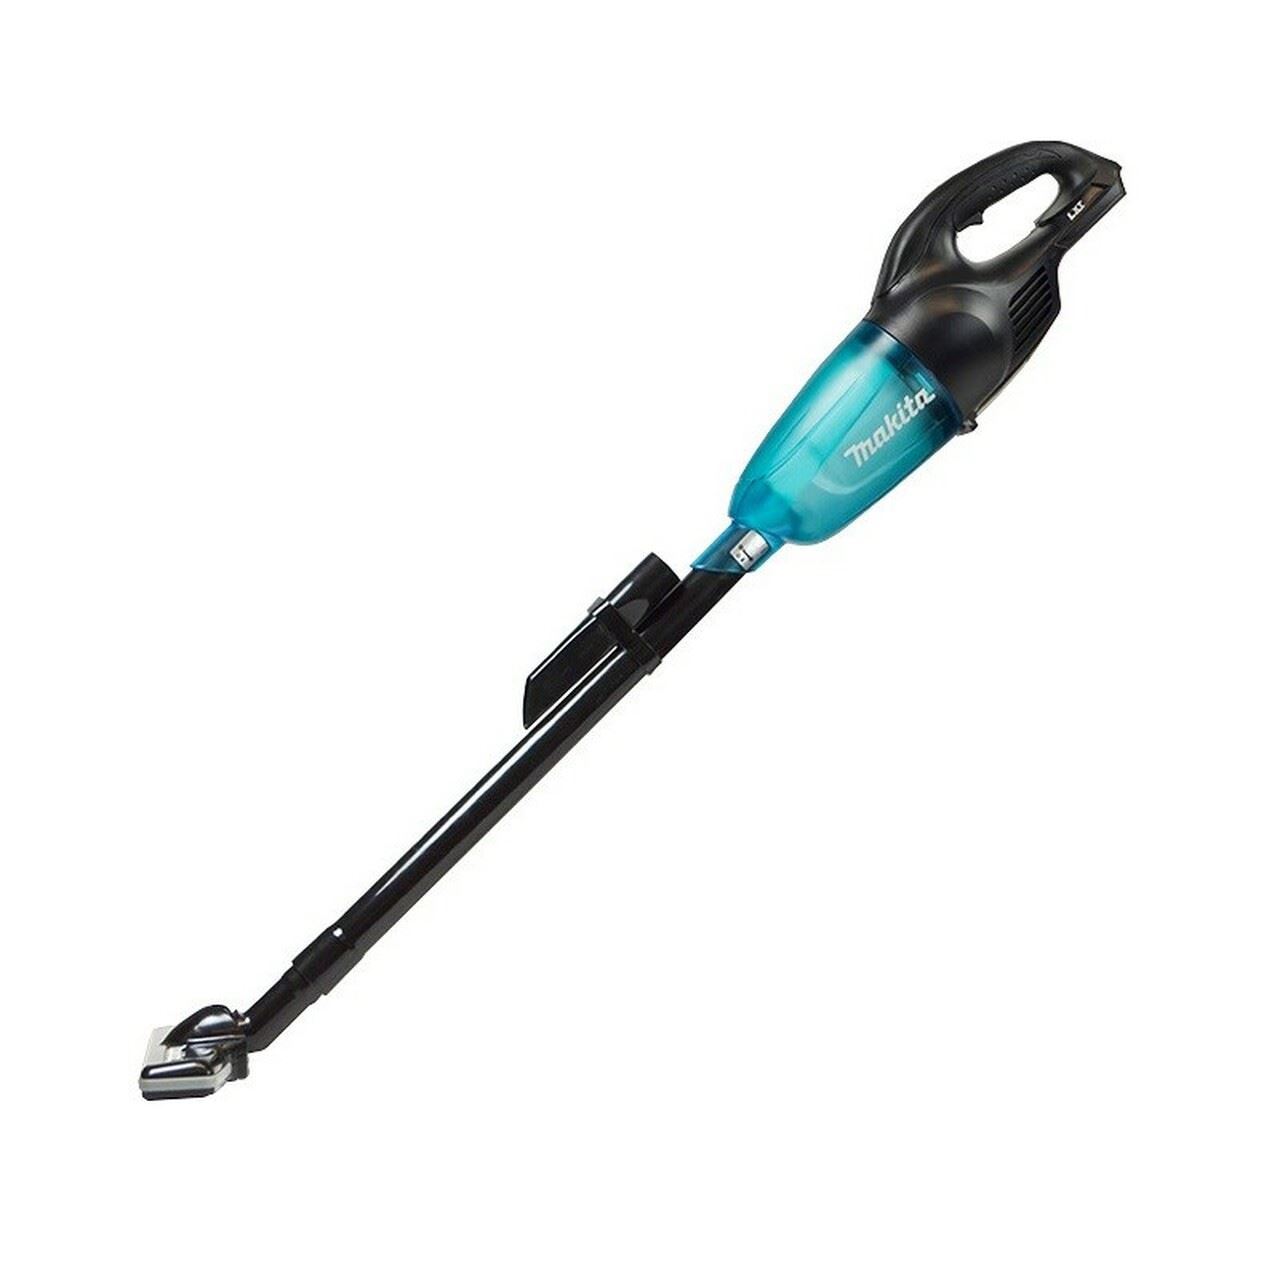 Makita DCL180ZB Battery Powered Vacuum Cleaner